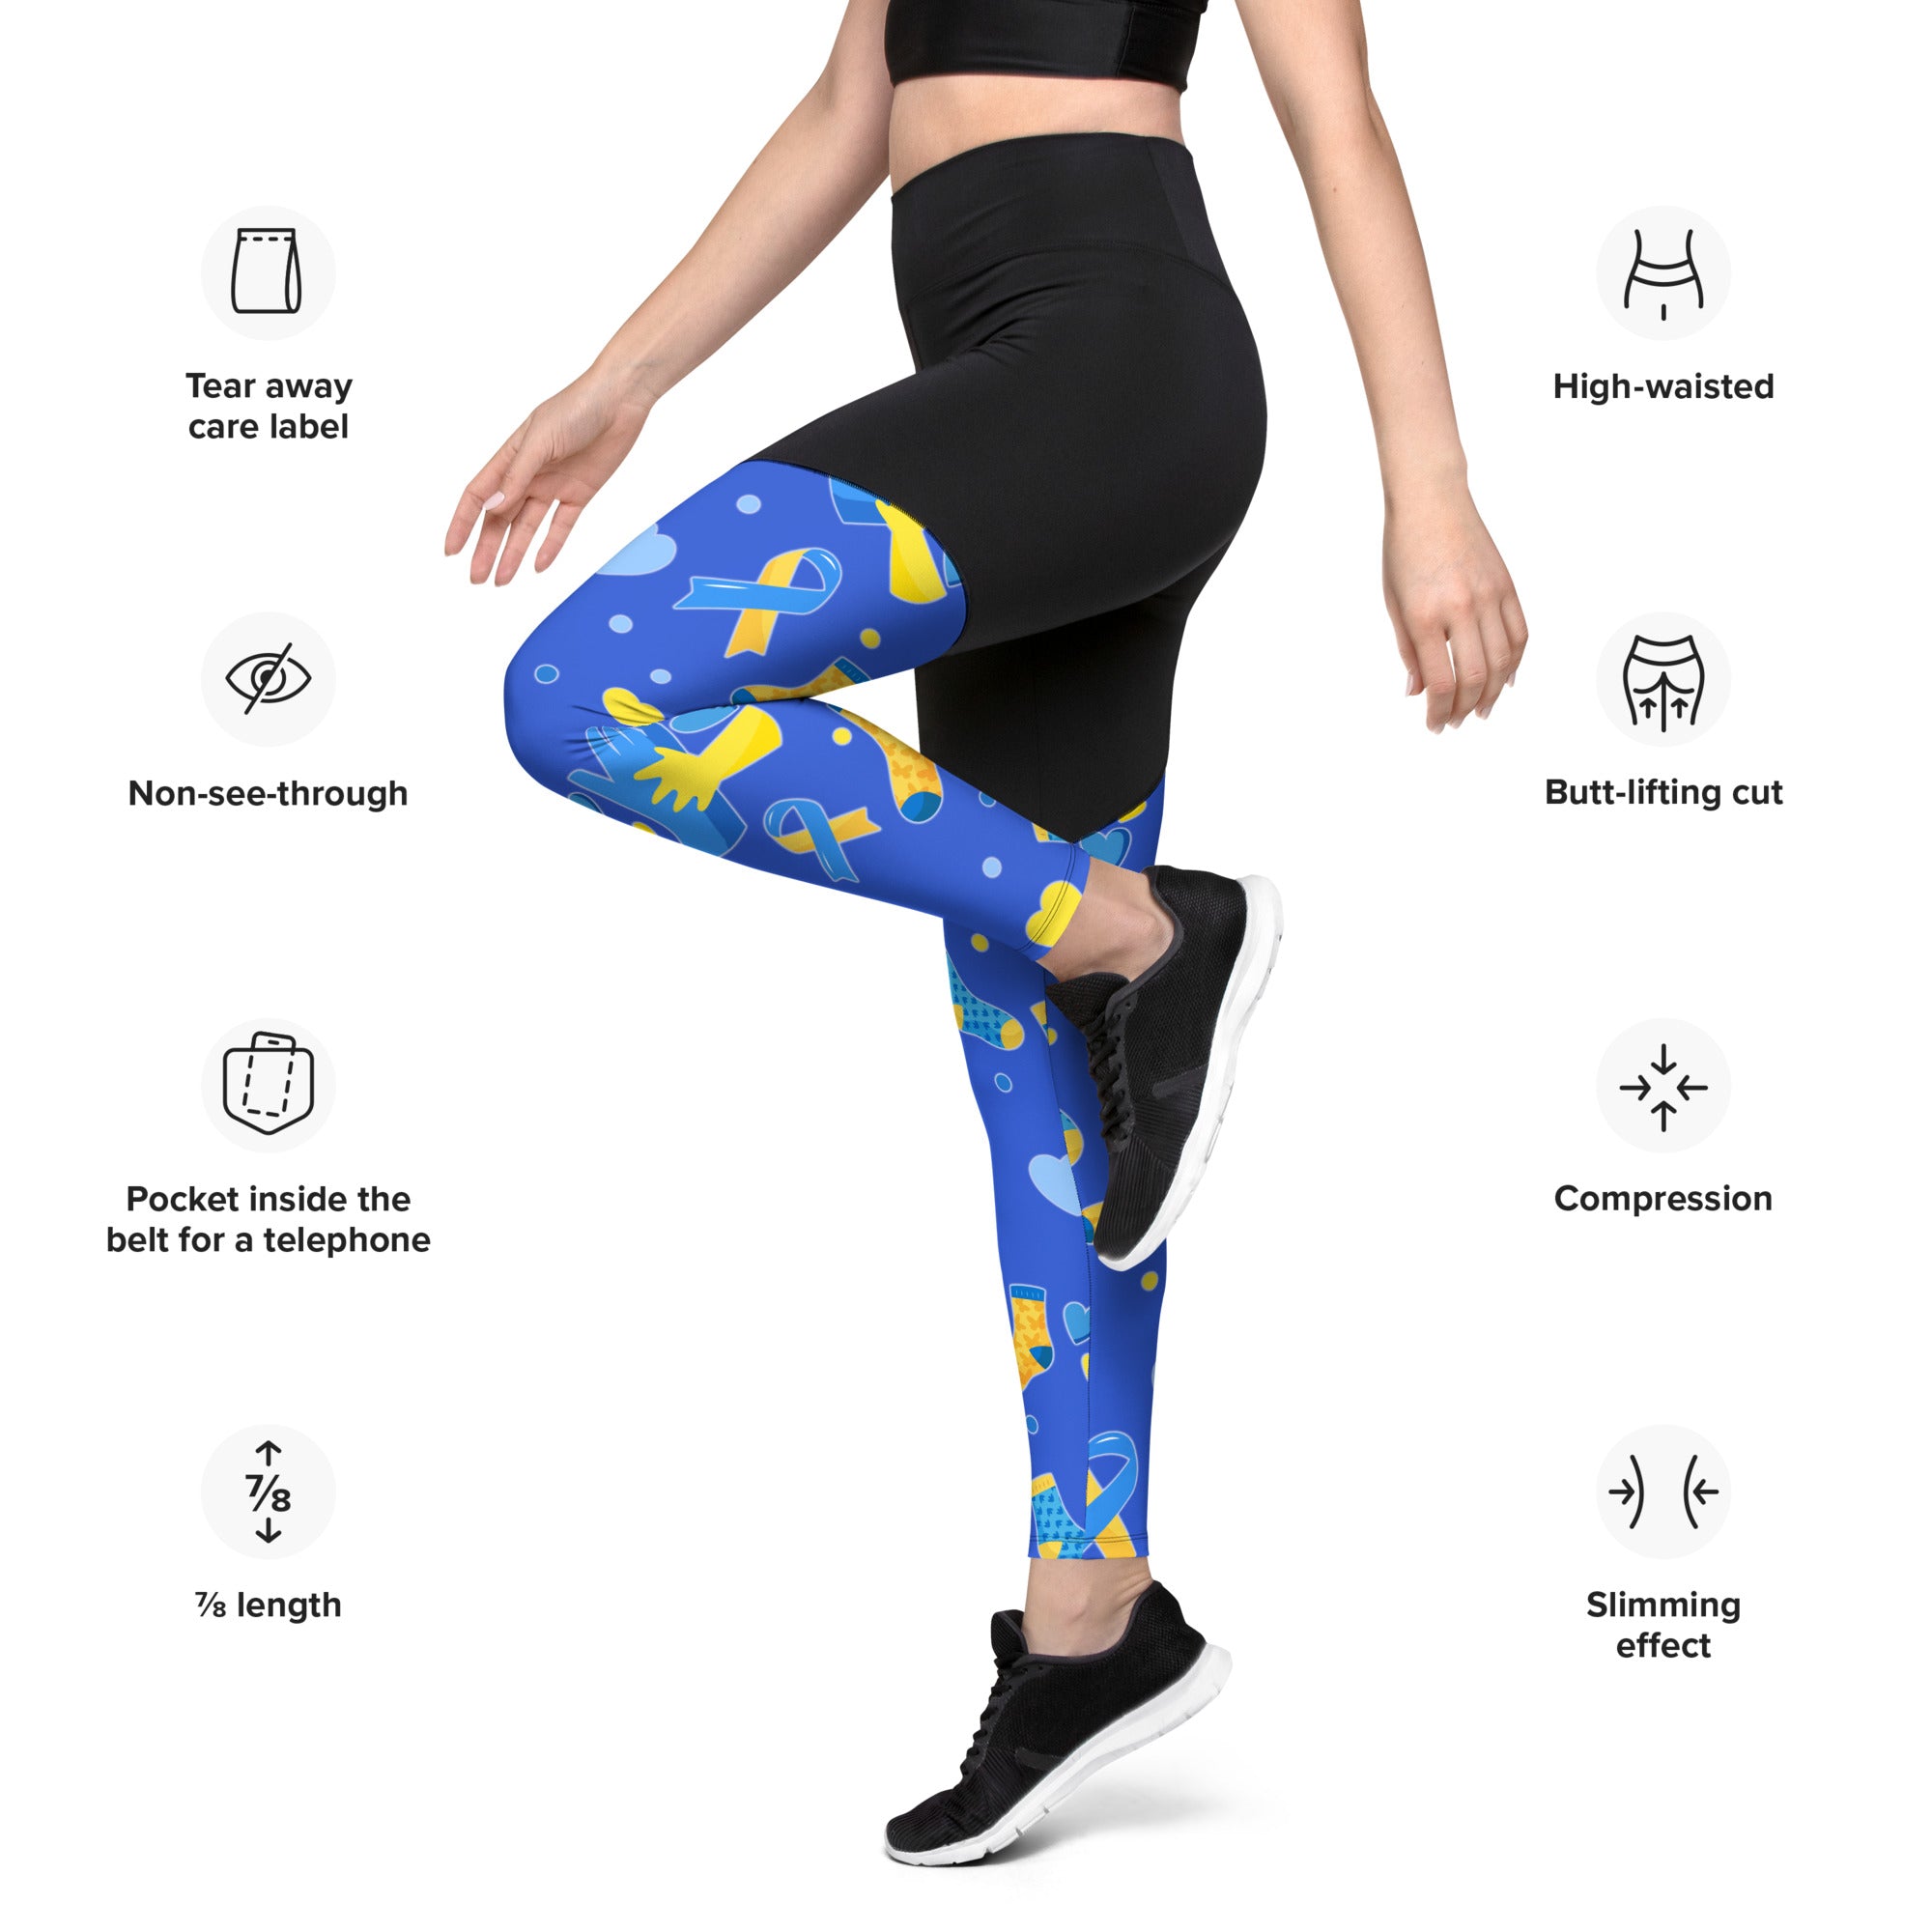 Down Syndrome Awareness Compression Leggings